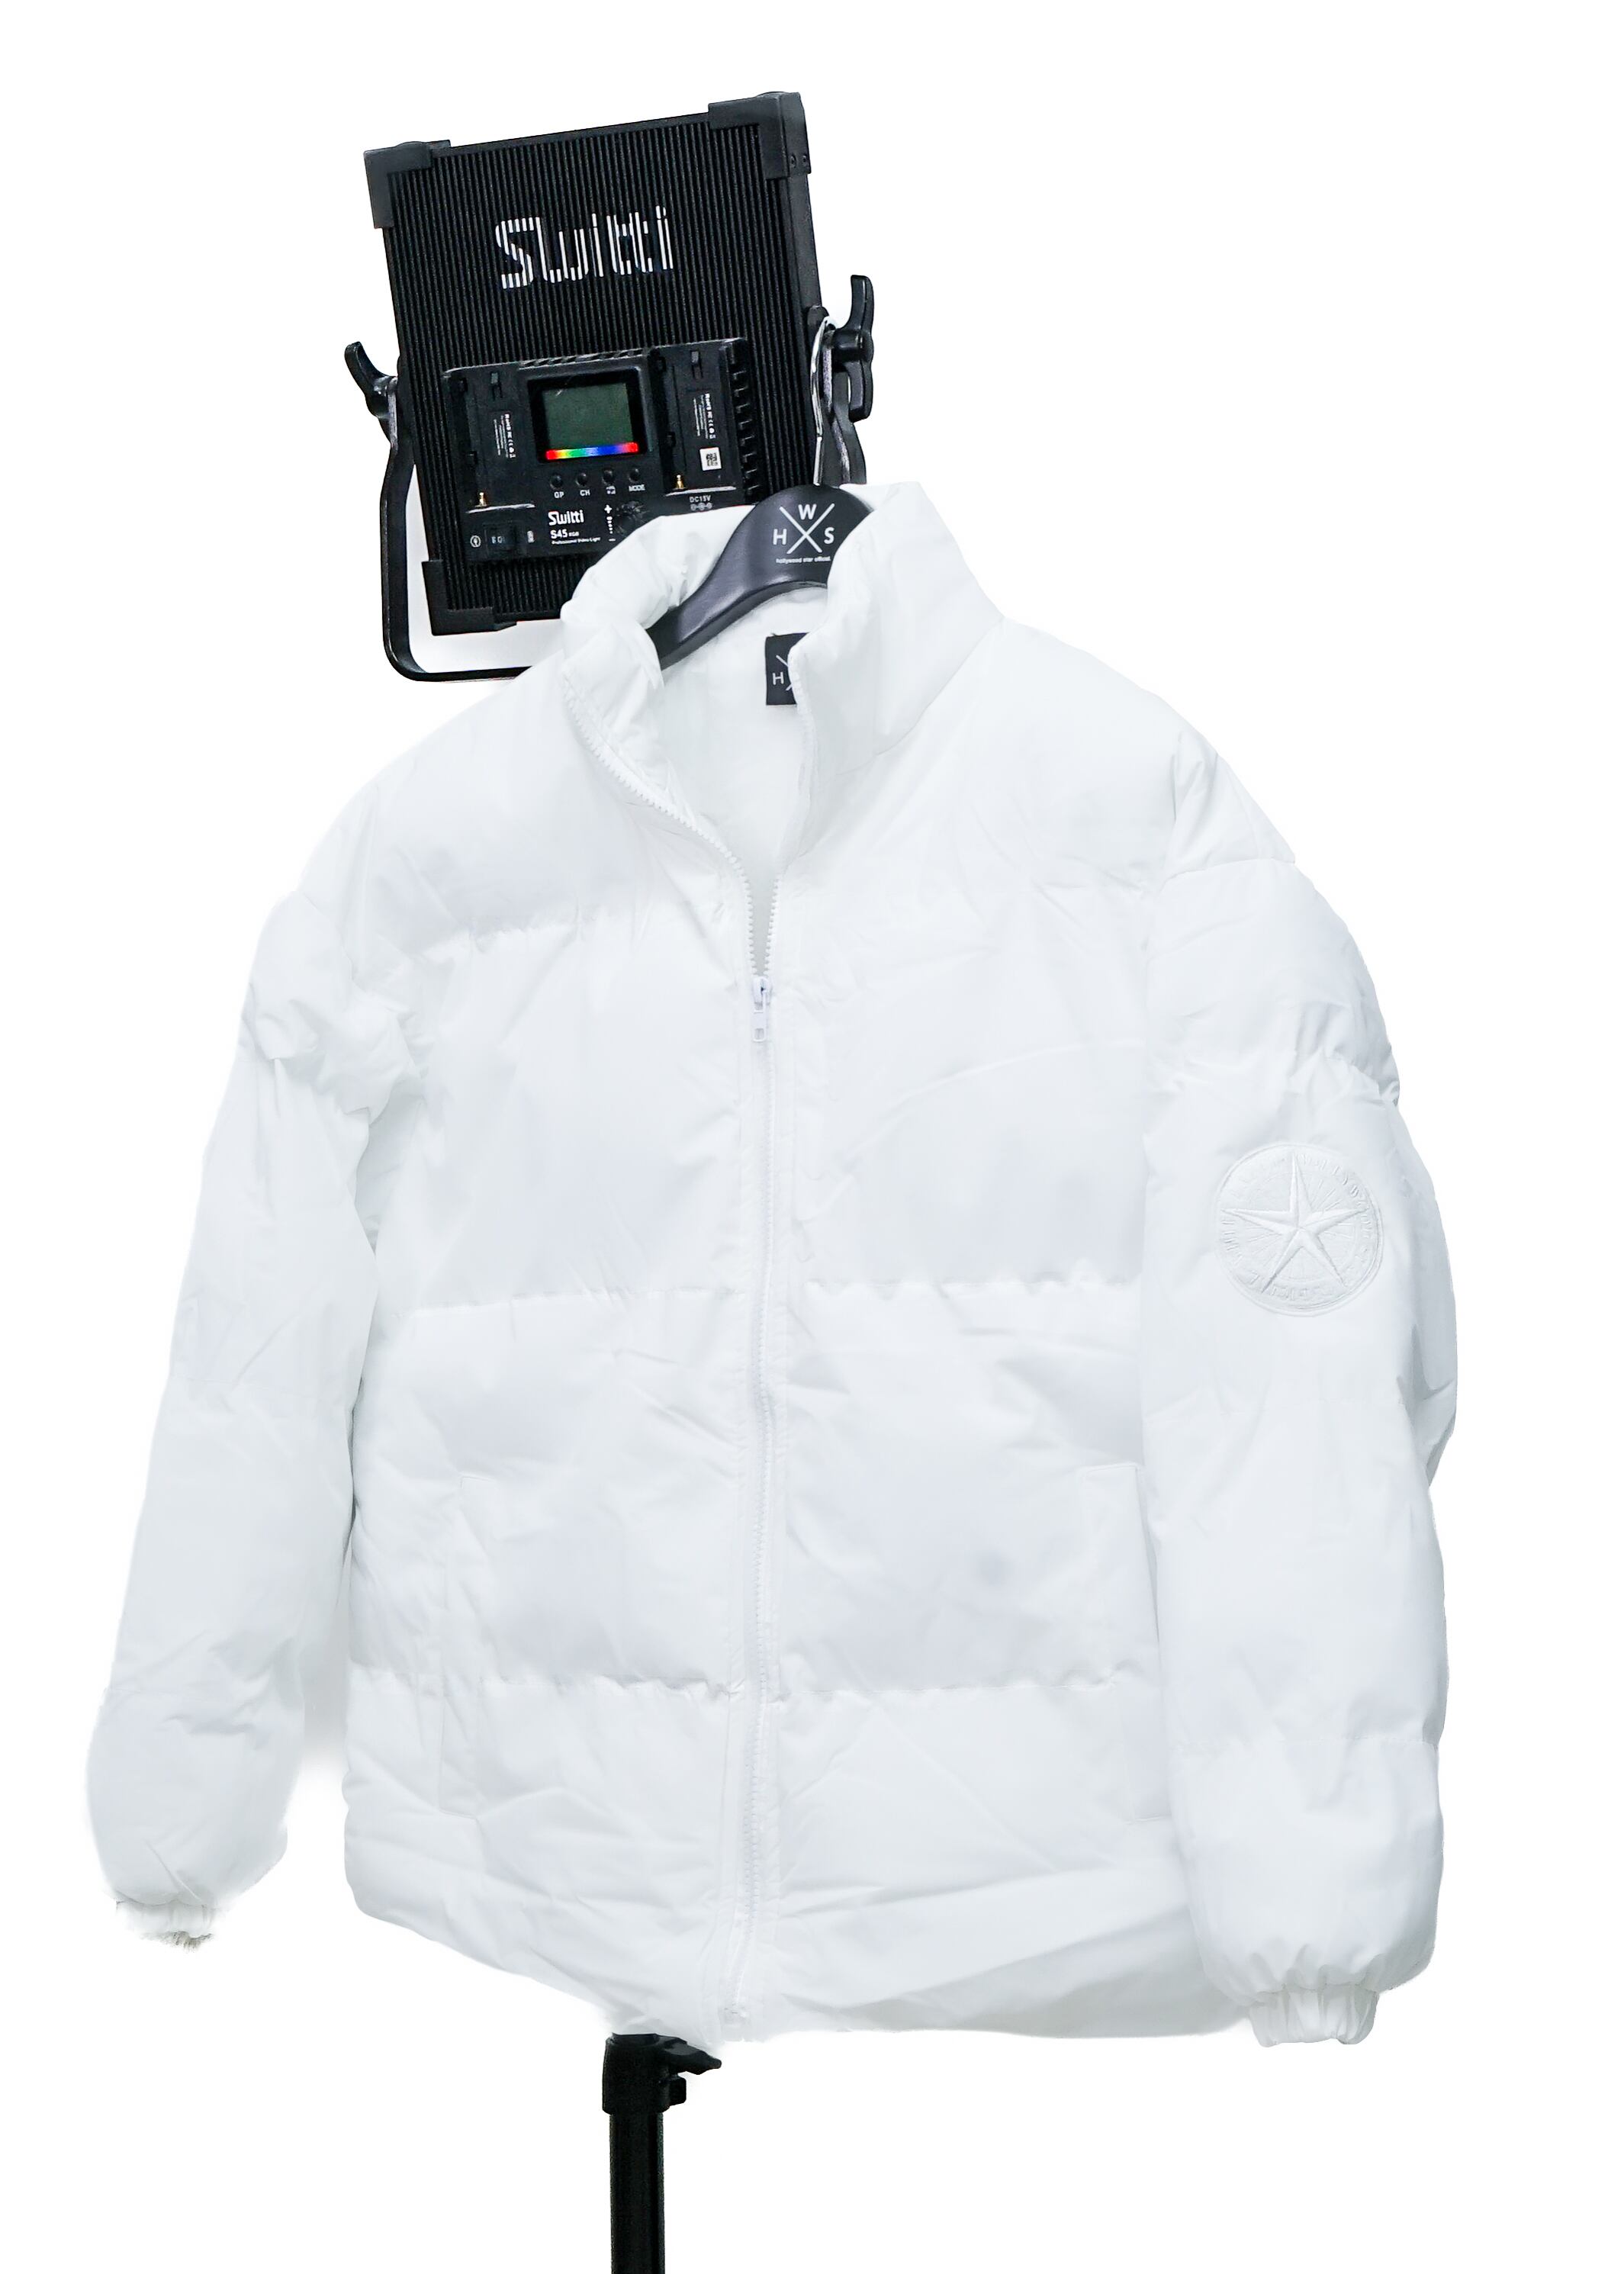 58.WHITE LABEL PUFFY JACKET | HOLLYWOOD STAR OFFICIAL powered by BASE